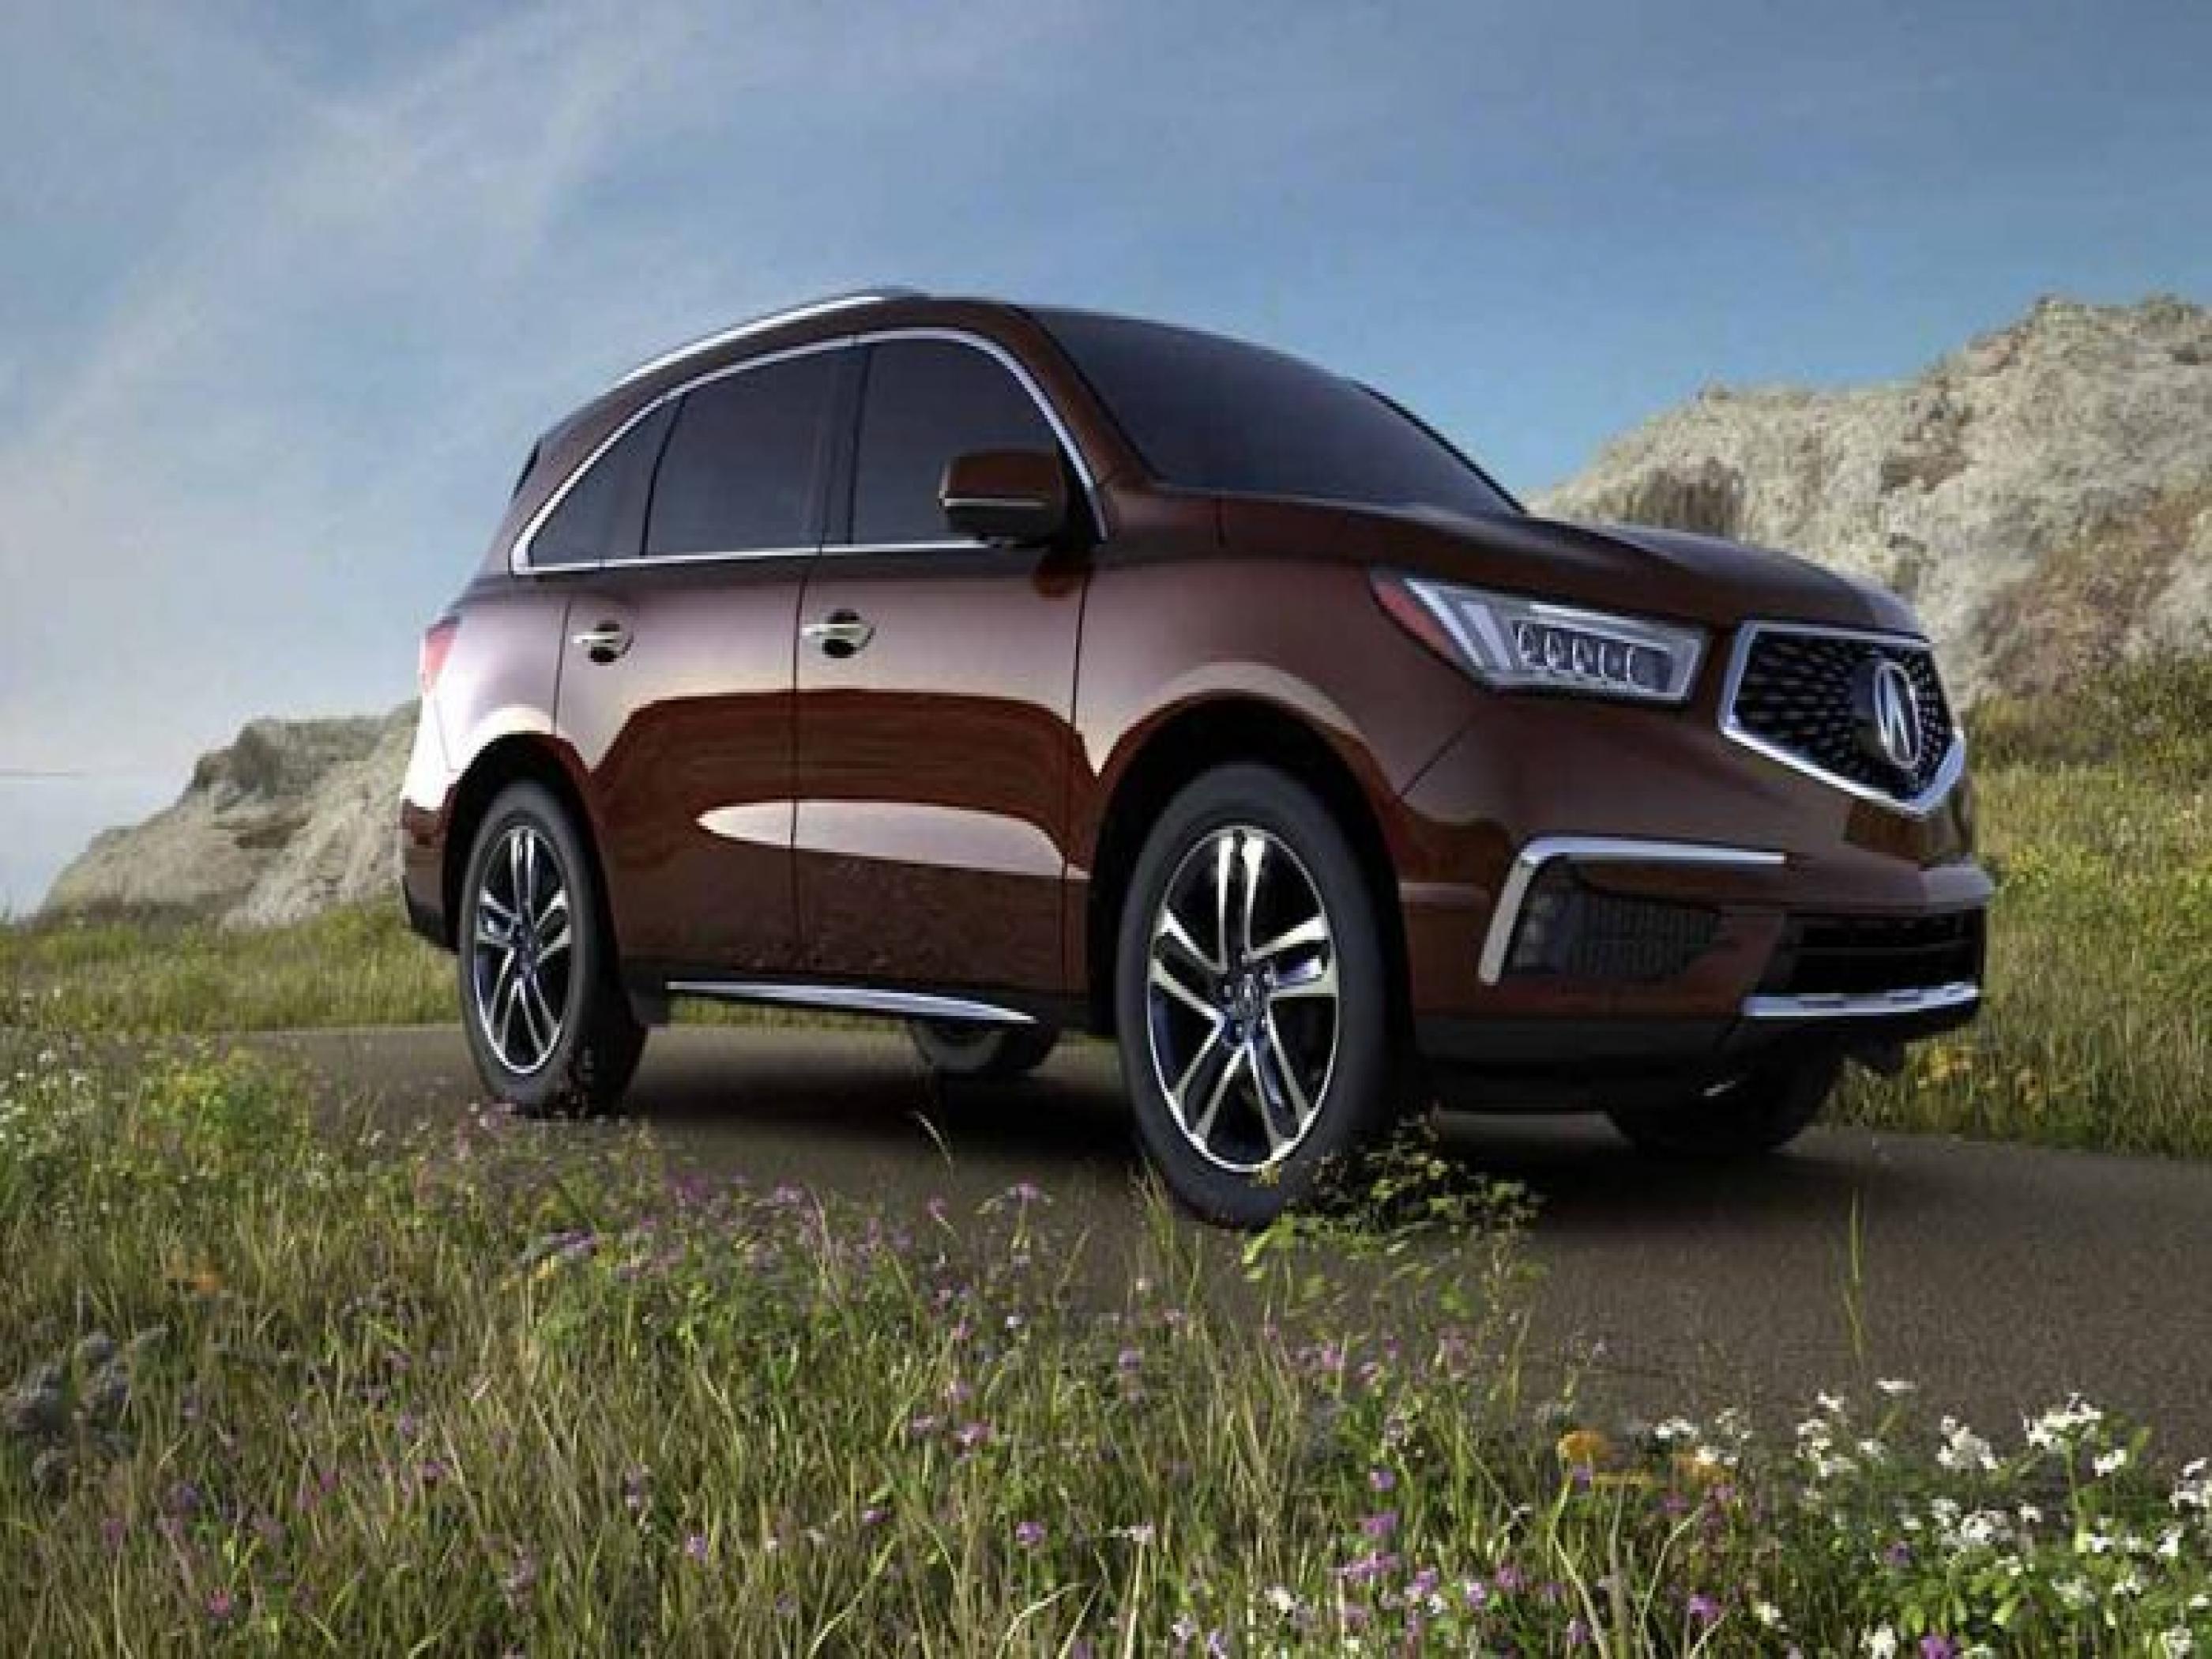 Pack.683: Acura MDX Wallpaper (775x436 px)